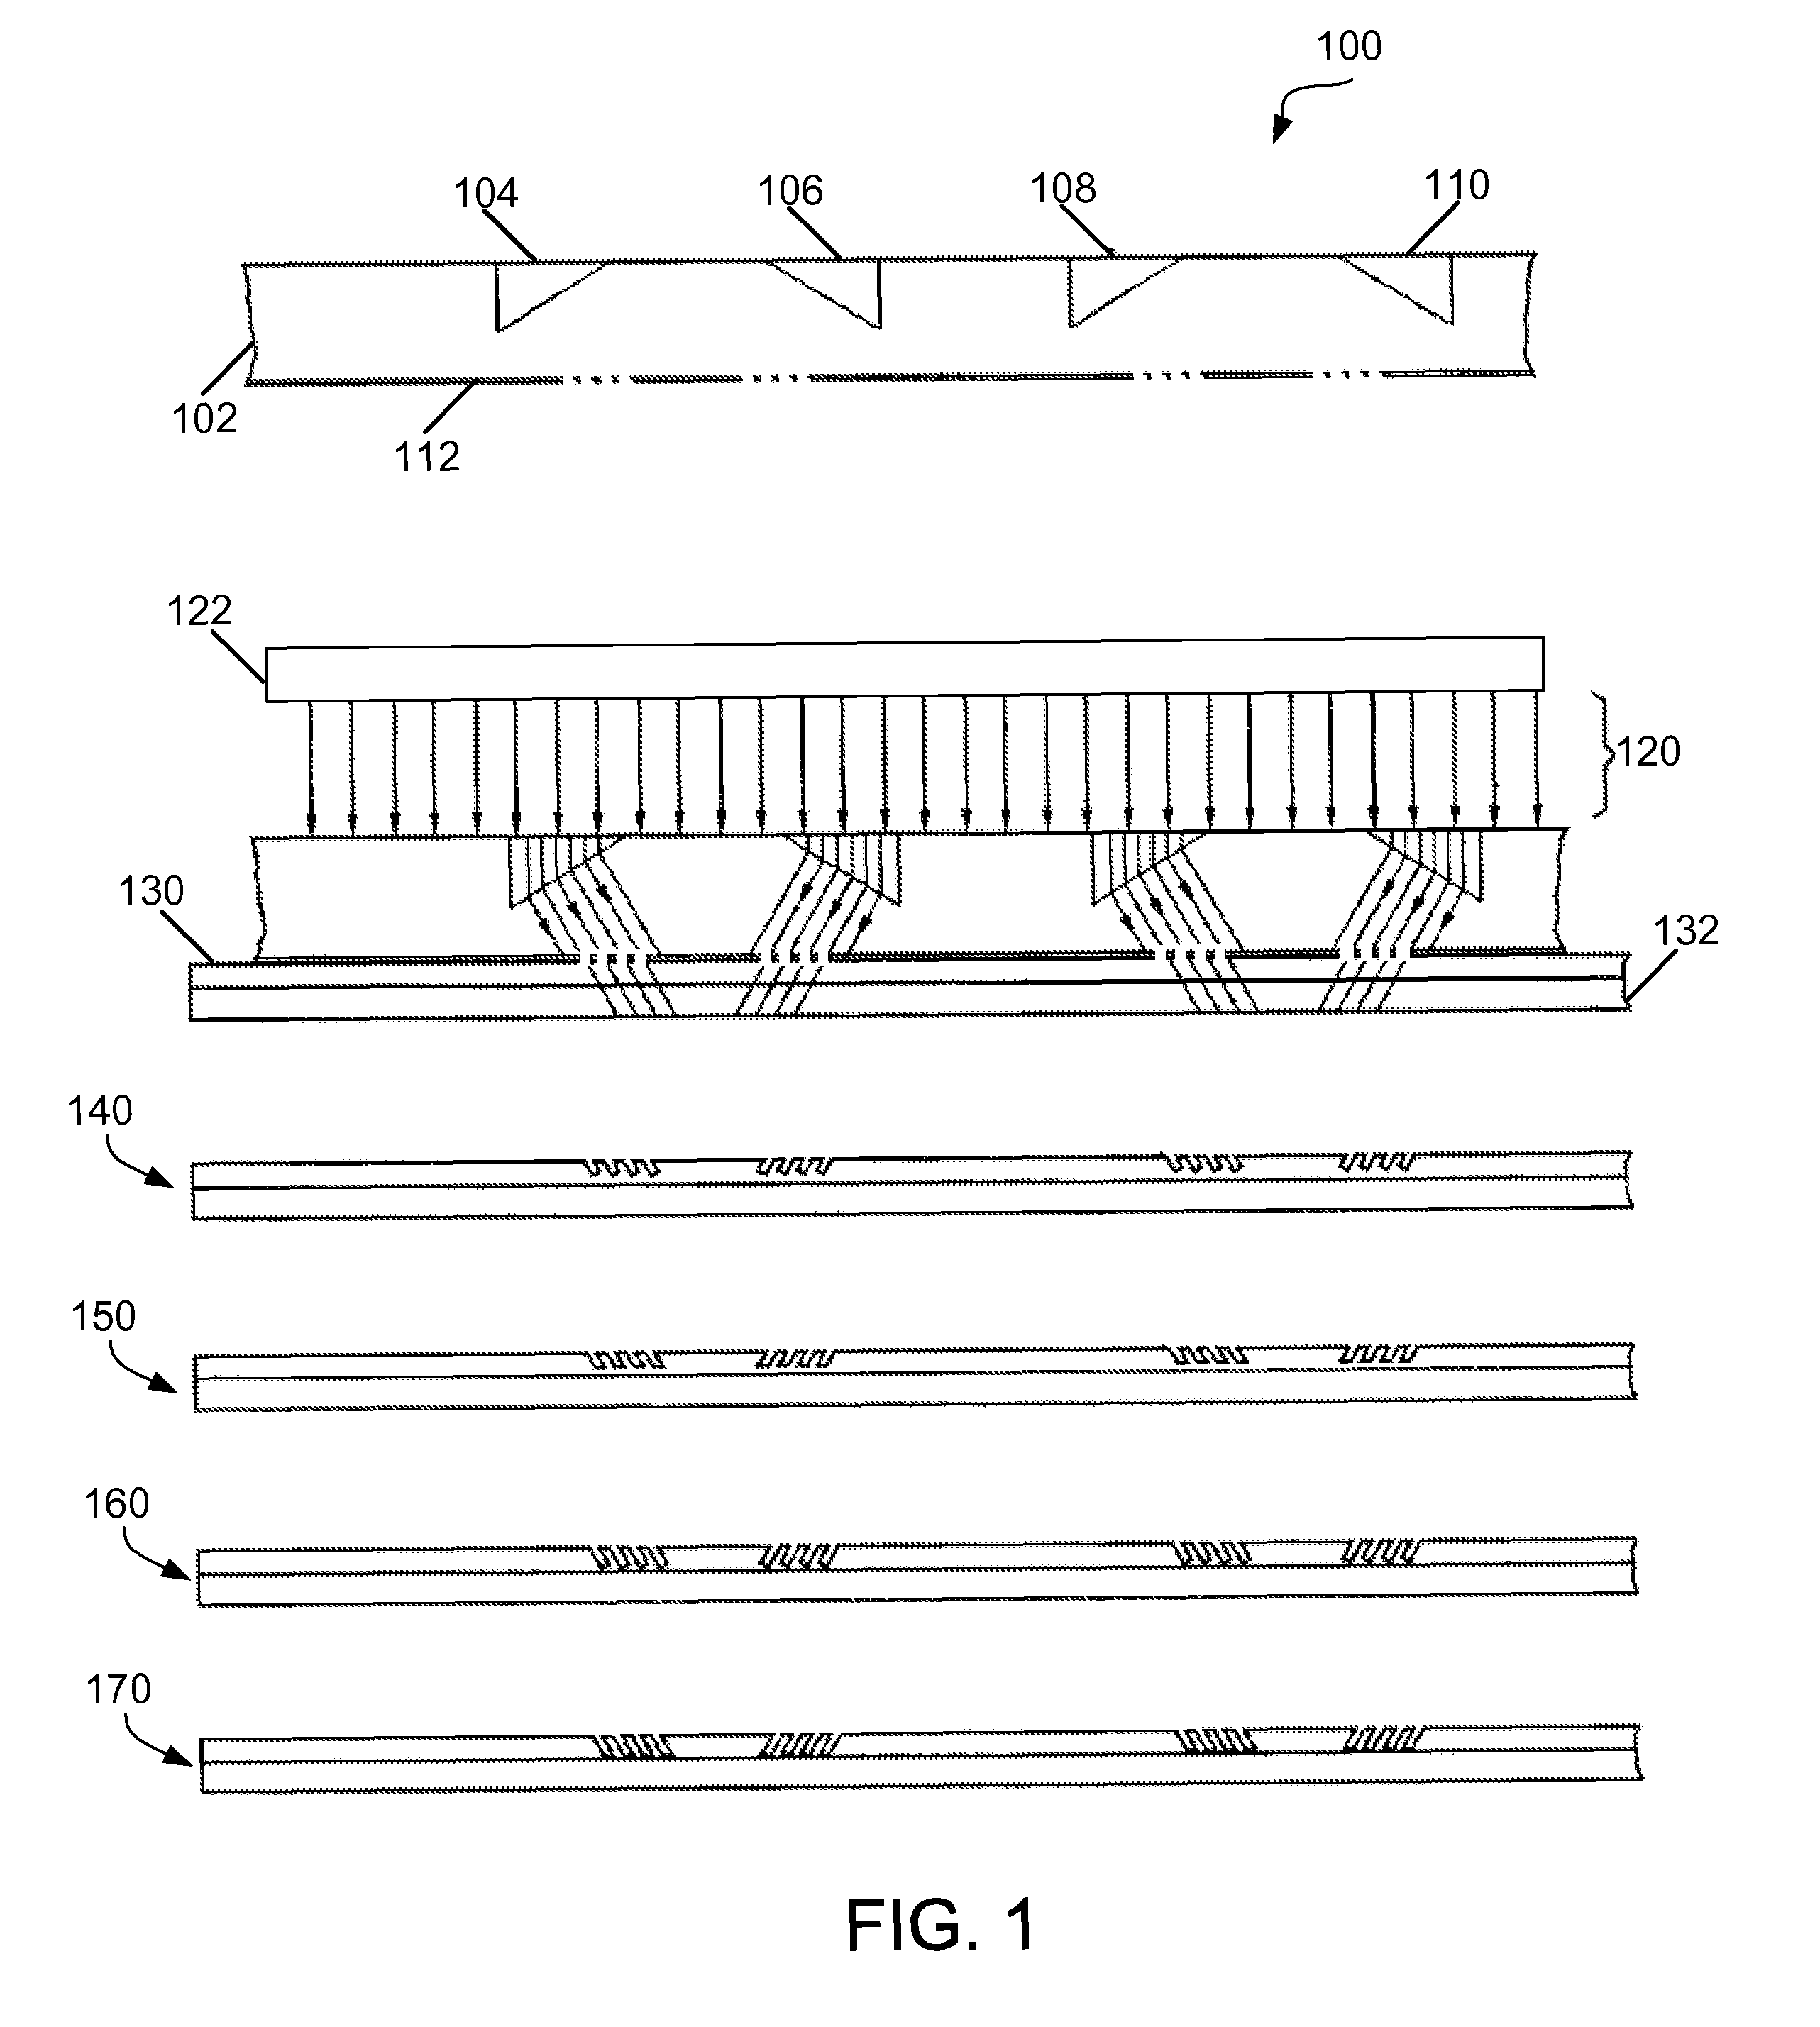 Photo-masks and methods of fabricating surface-relief grating diffractive devices